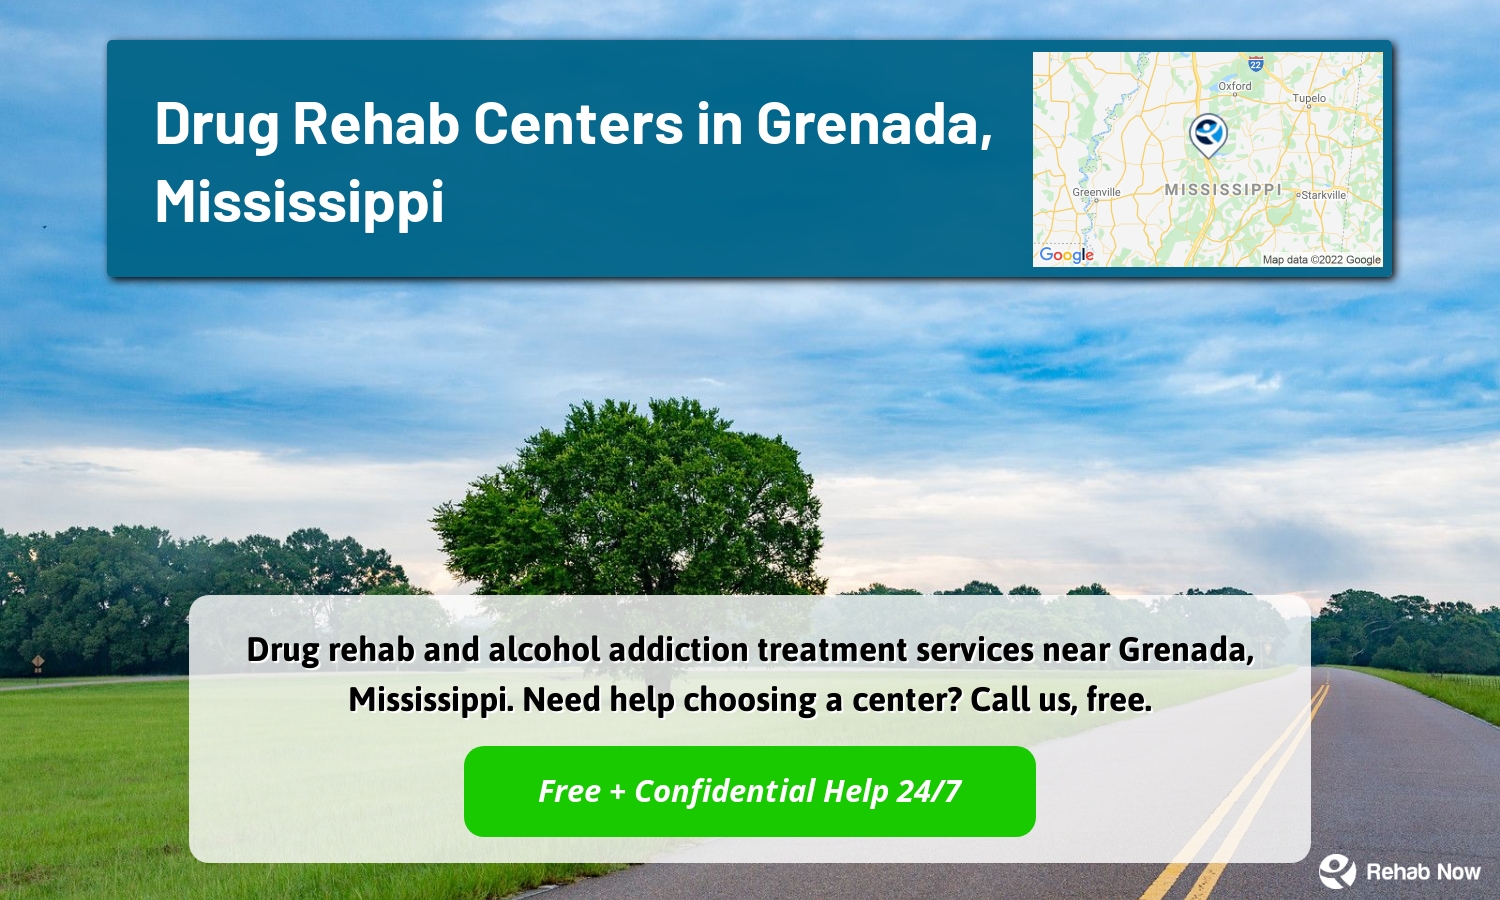 Drug rehab and alcohol addiction treatment services near Grenada, Mississippi. Need help choosing a center? Call us, free.